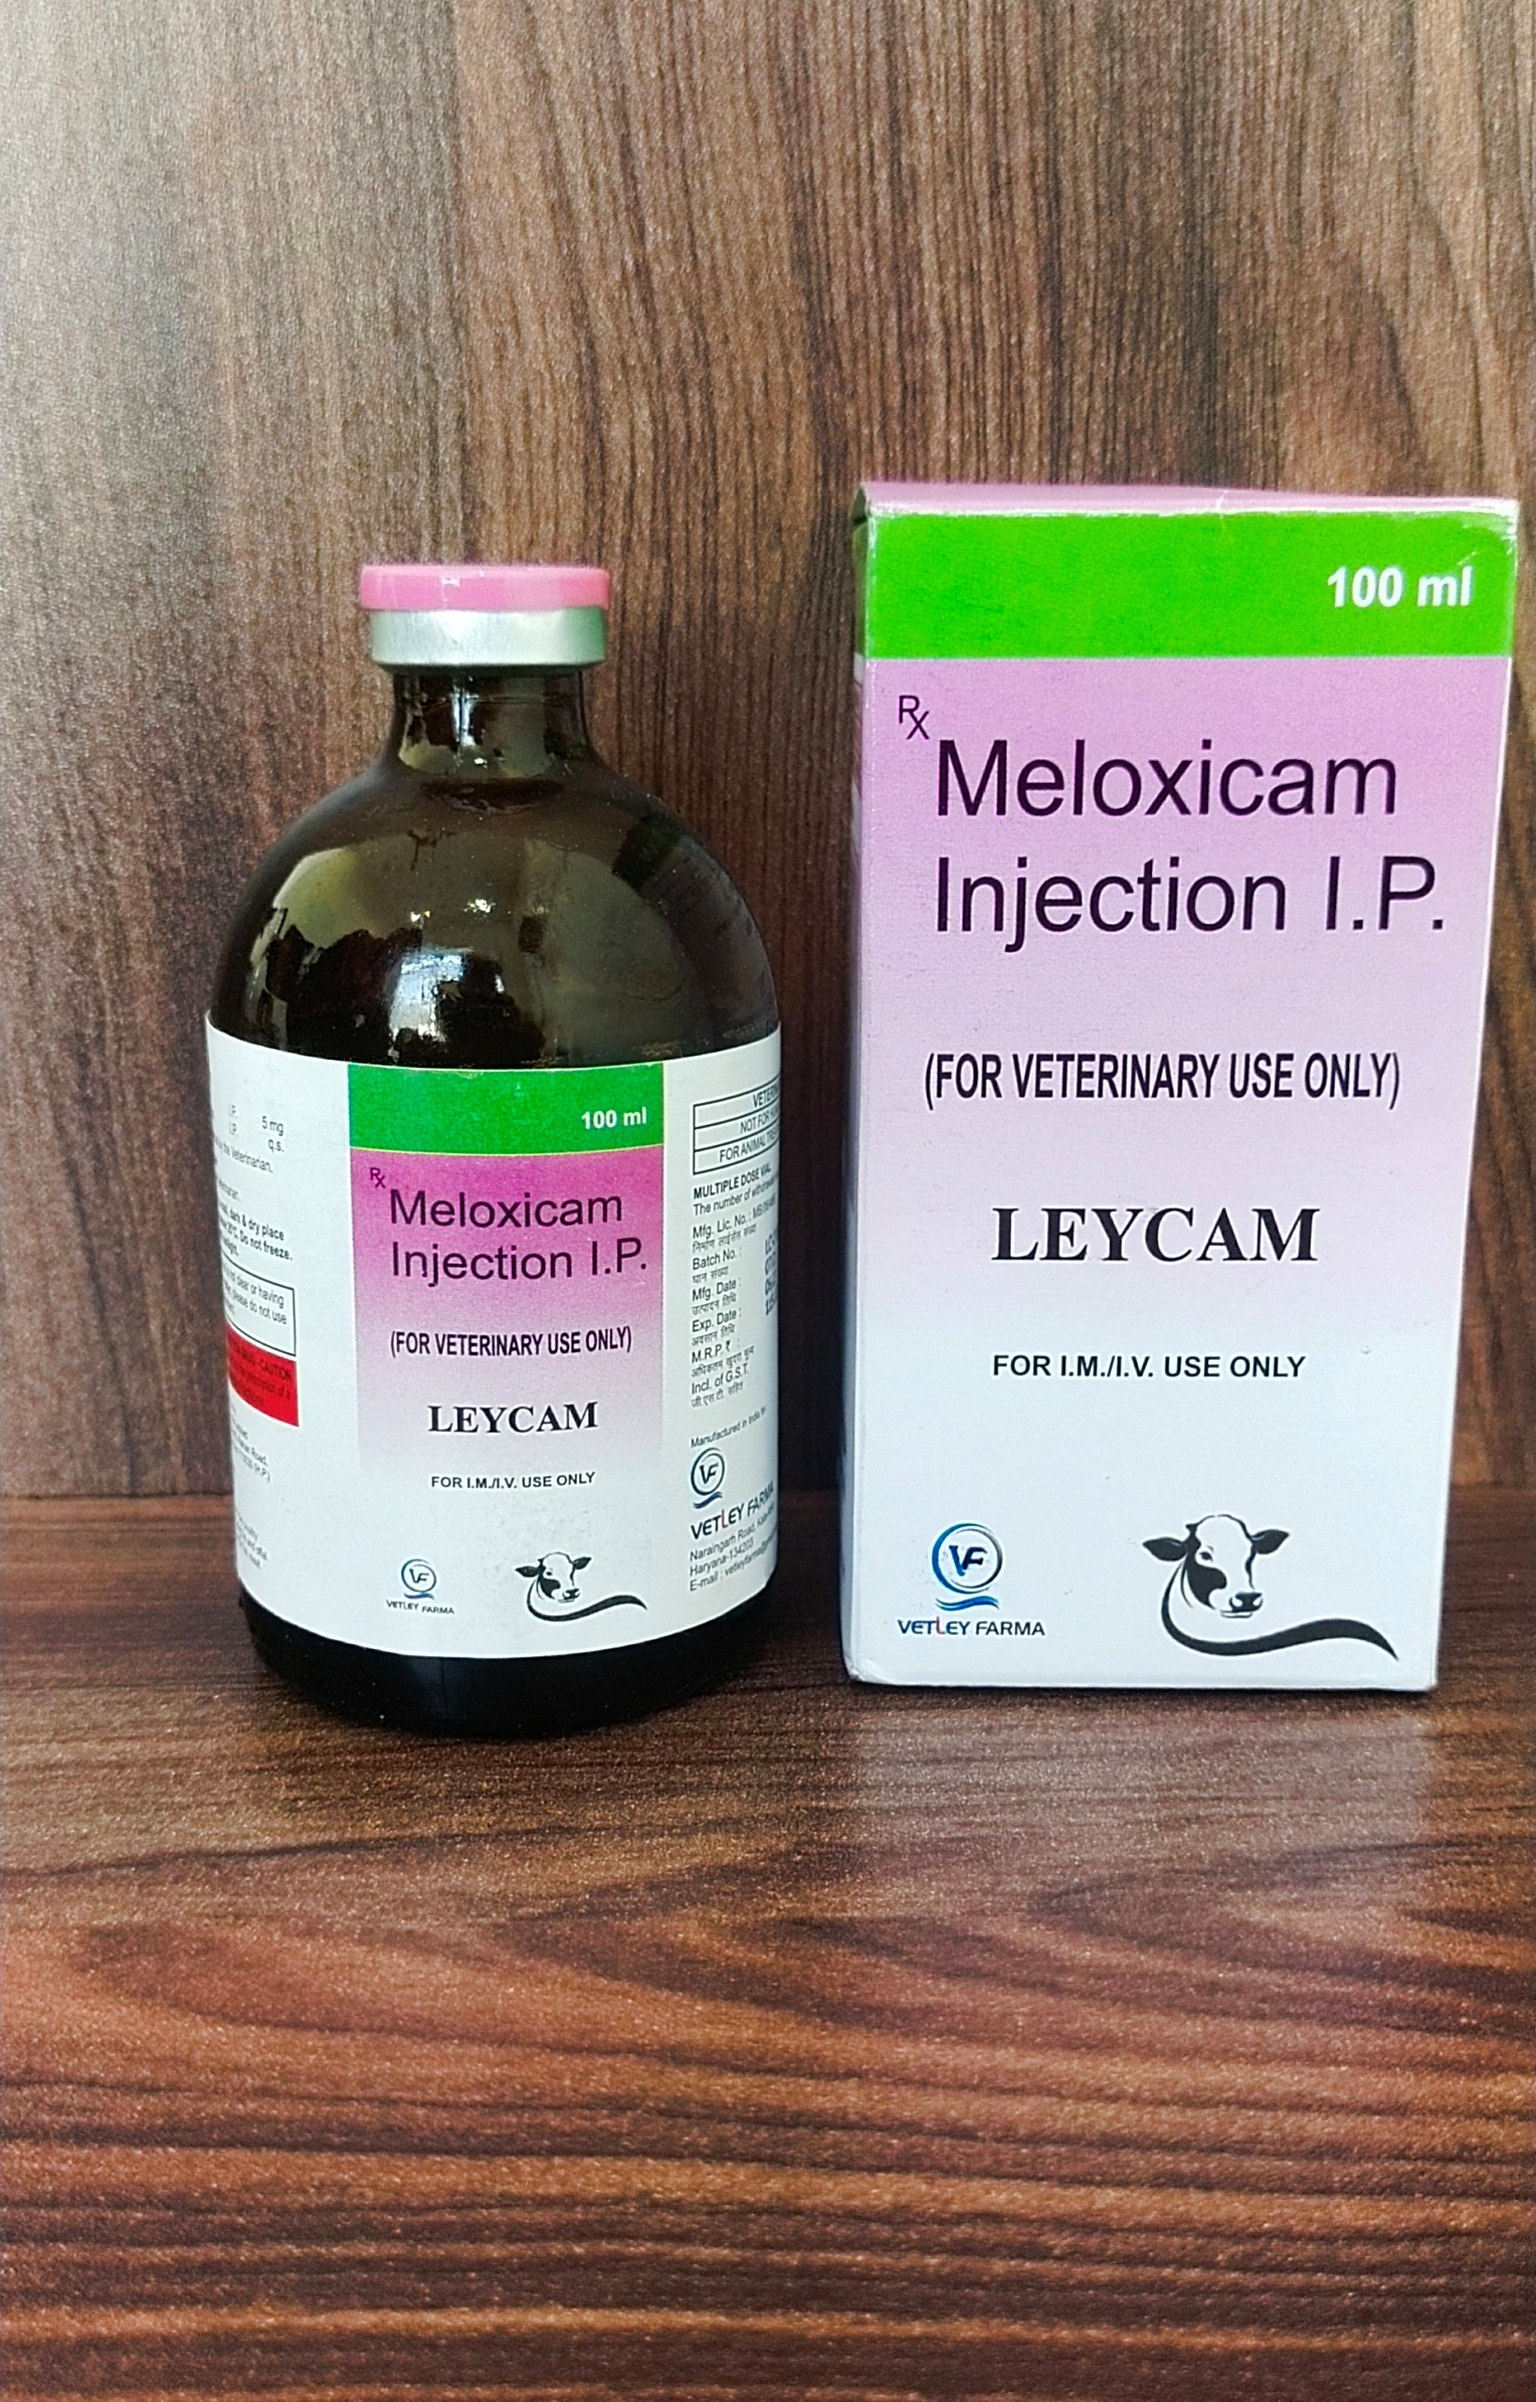 Meloxicam With Paracetamol injection